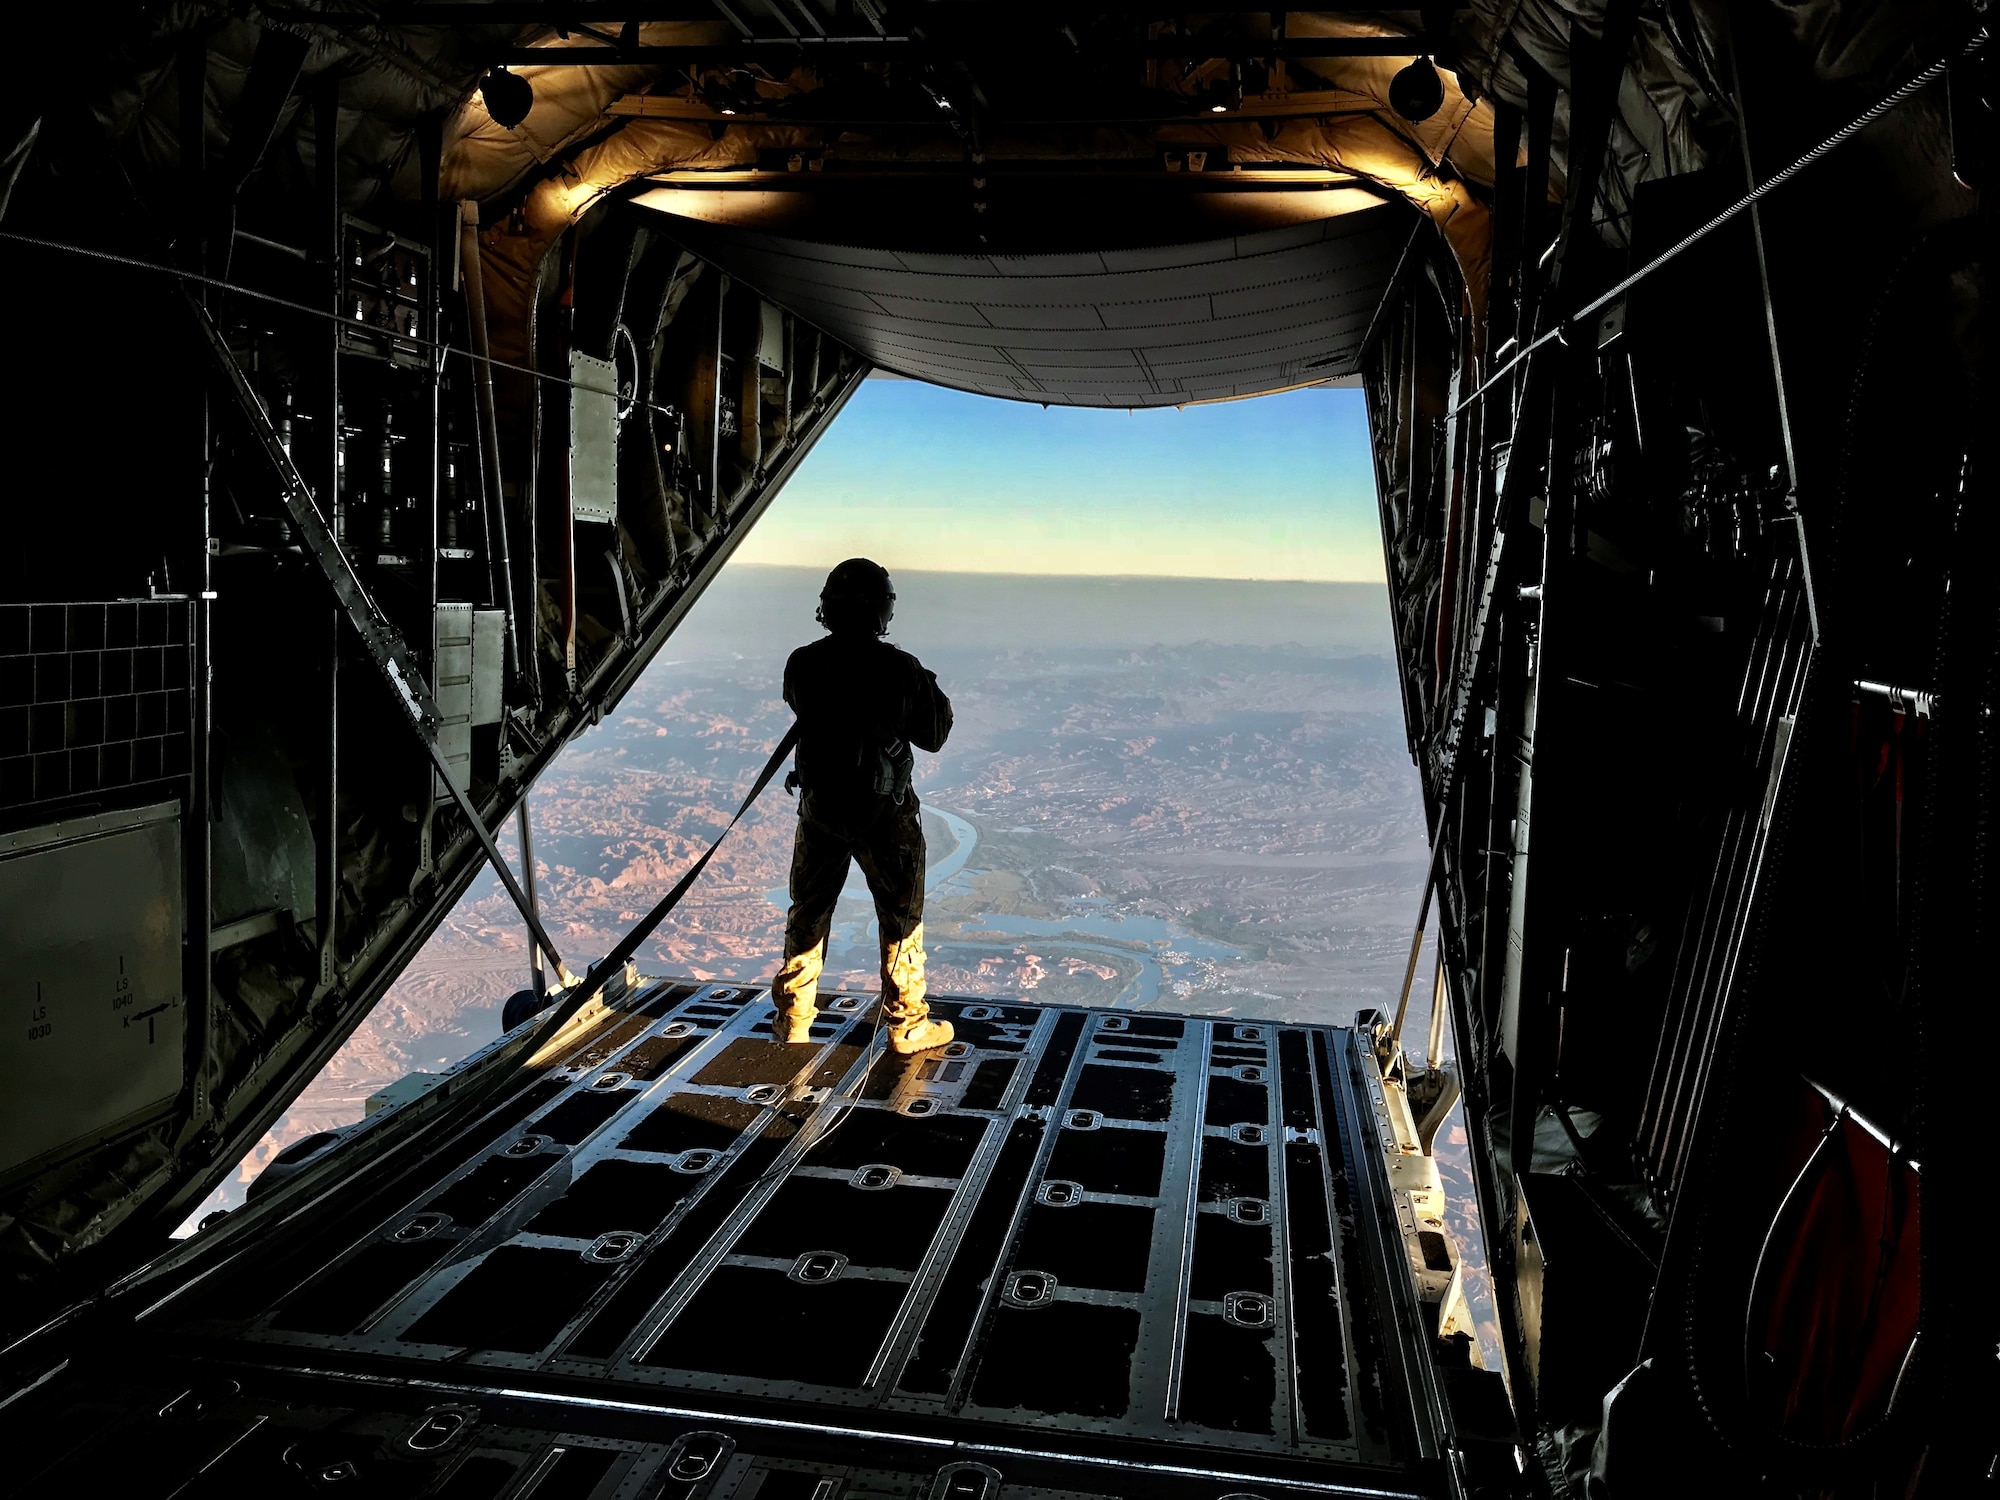 Senior Airman Christopher Godkin, 815th Airlift Squadron loadmaster, looks out the cargo door at 9,000 feet over Laguna Army Airfield at Yuma Army Proving Grounds, Yuma, Ariz during a combined training event with the Military Freefall School, Oct. 1-5, 2018.  The Air Force Reserve 815th AS provided airlift for the joint forces training school, which covers all aspects of military freefall parachuting. (U.S. Air Force photo by Master Sgt. Anthony Flores)